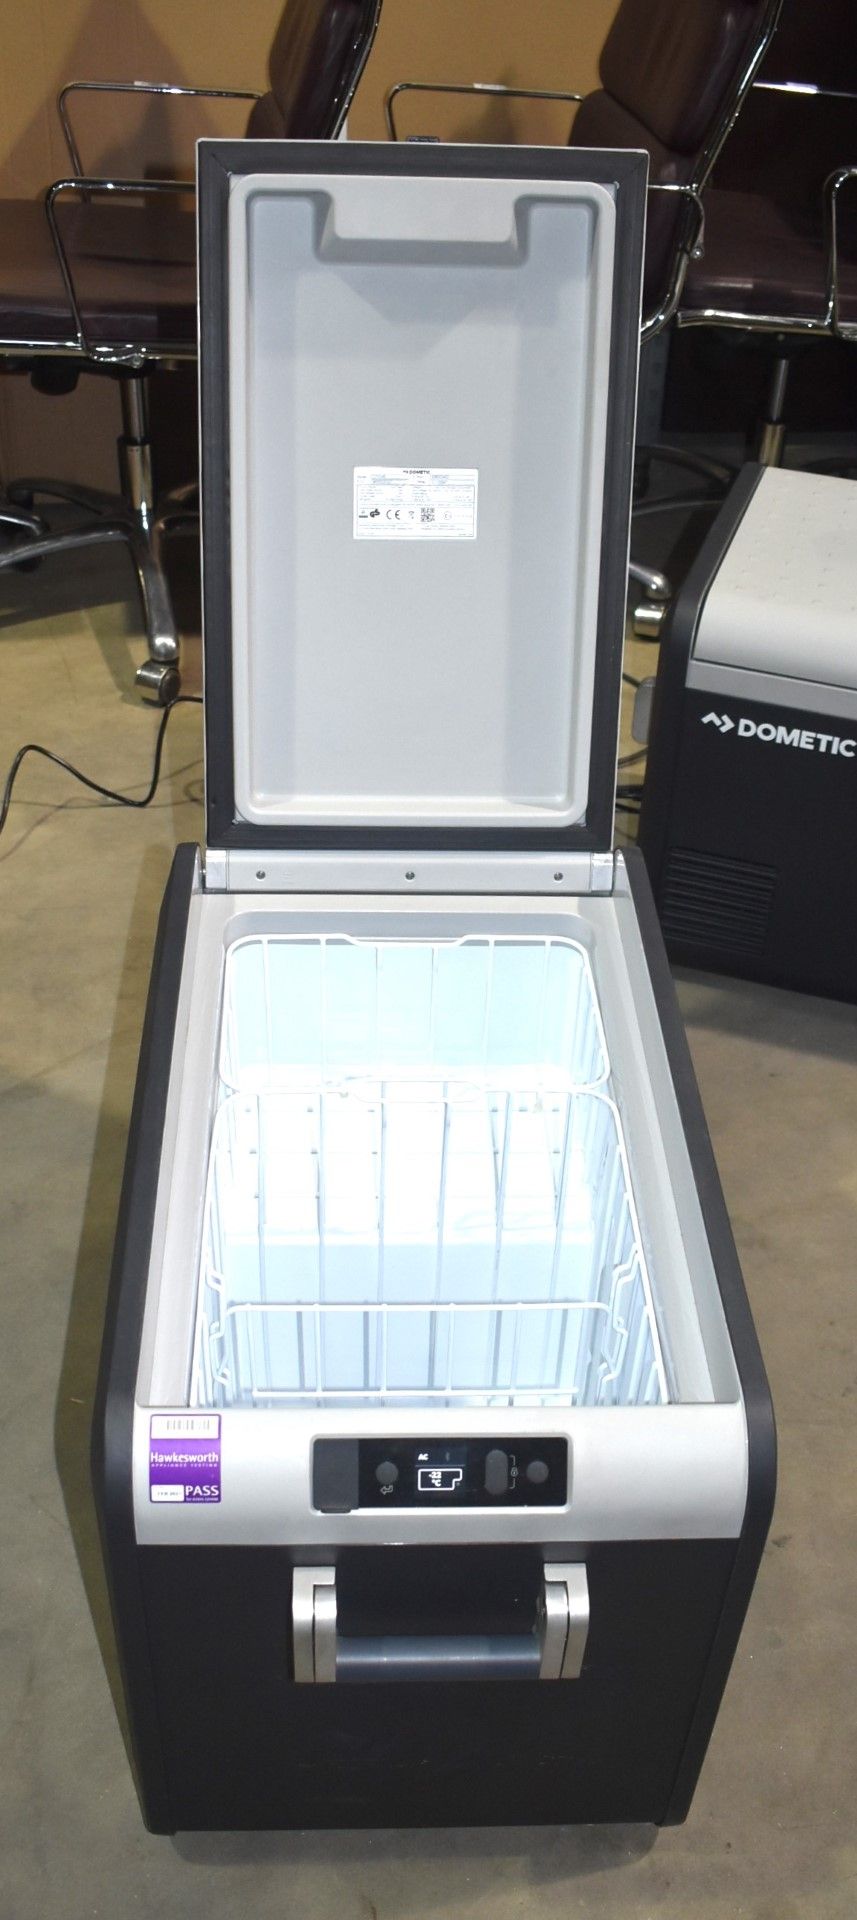 1 x Dometic CFX3 45 Portable 40l Compressor Cooler and Freezer - Features Bluetooth and WiFi - Image 7 of 10